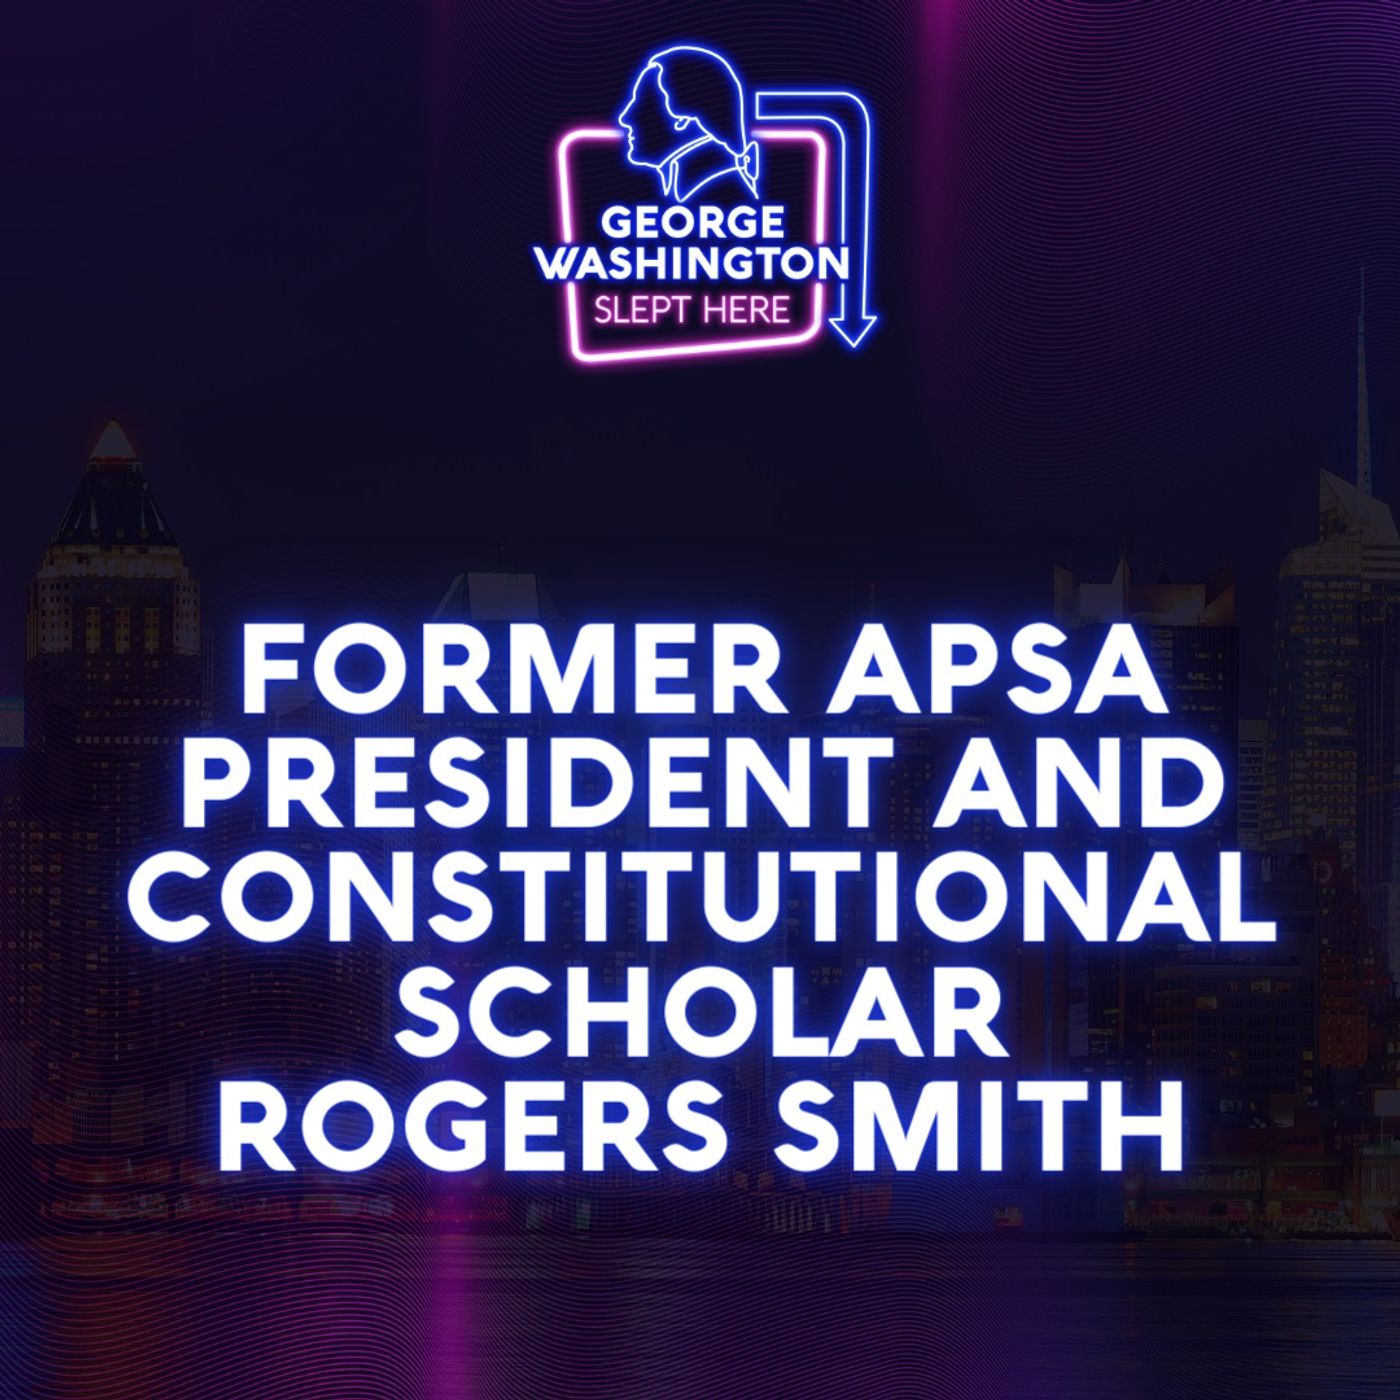 Former APSA President and Constitutional Scholar Rogers Smith